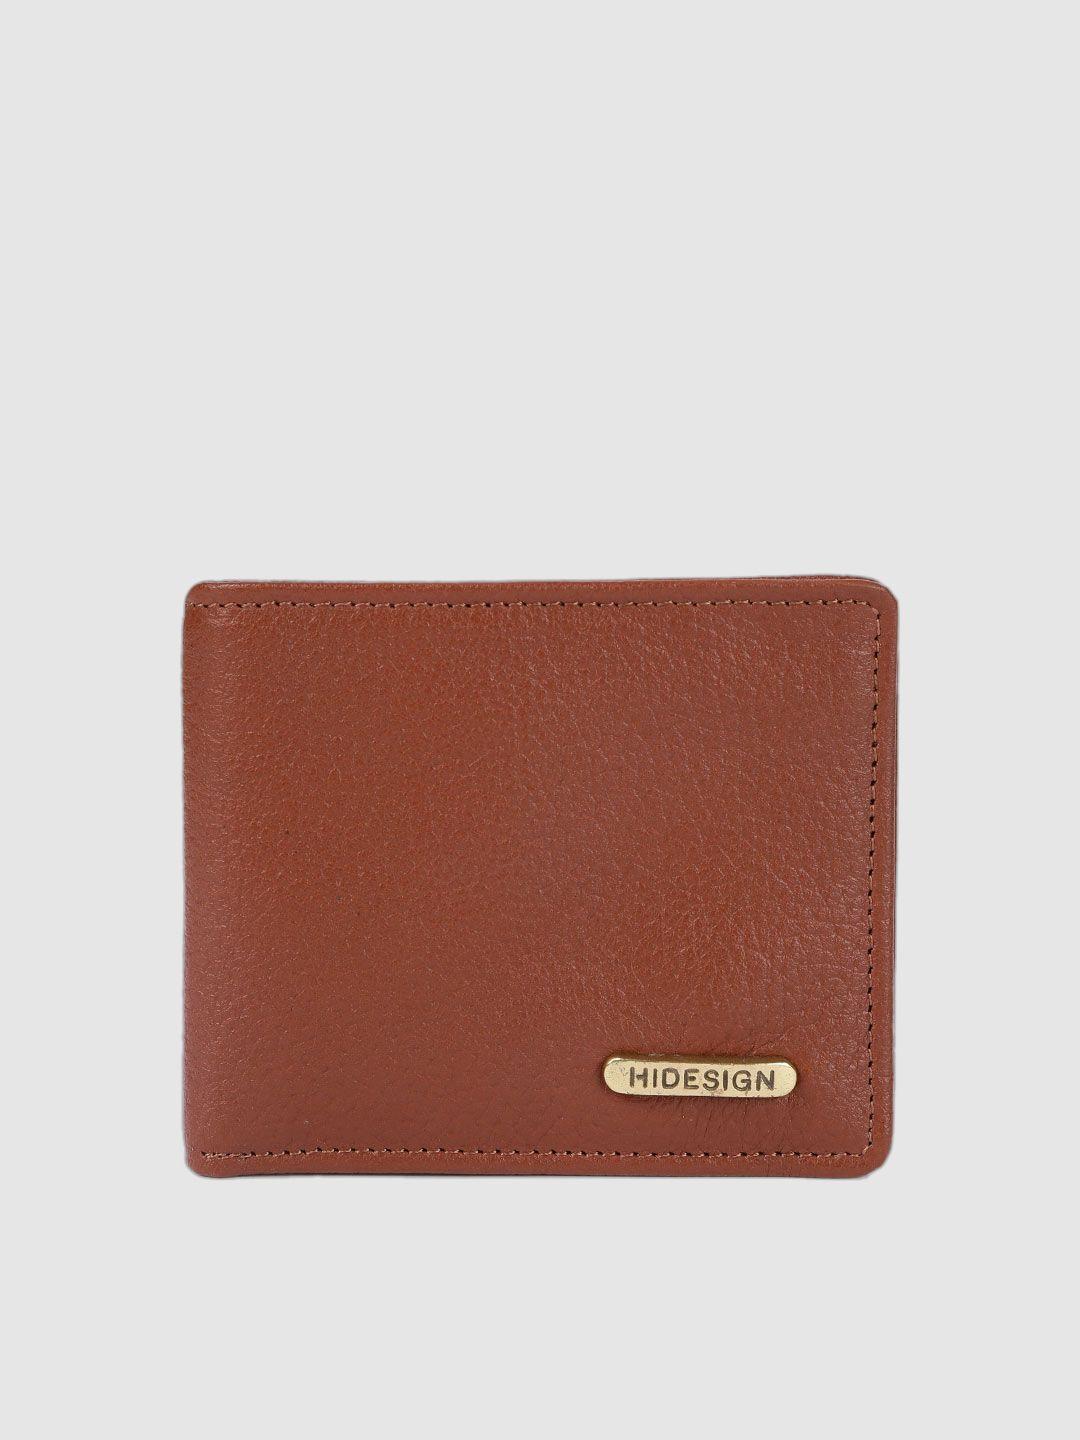 hidesign men tan brown textured leather two fold wallet